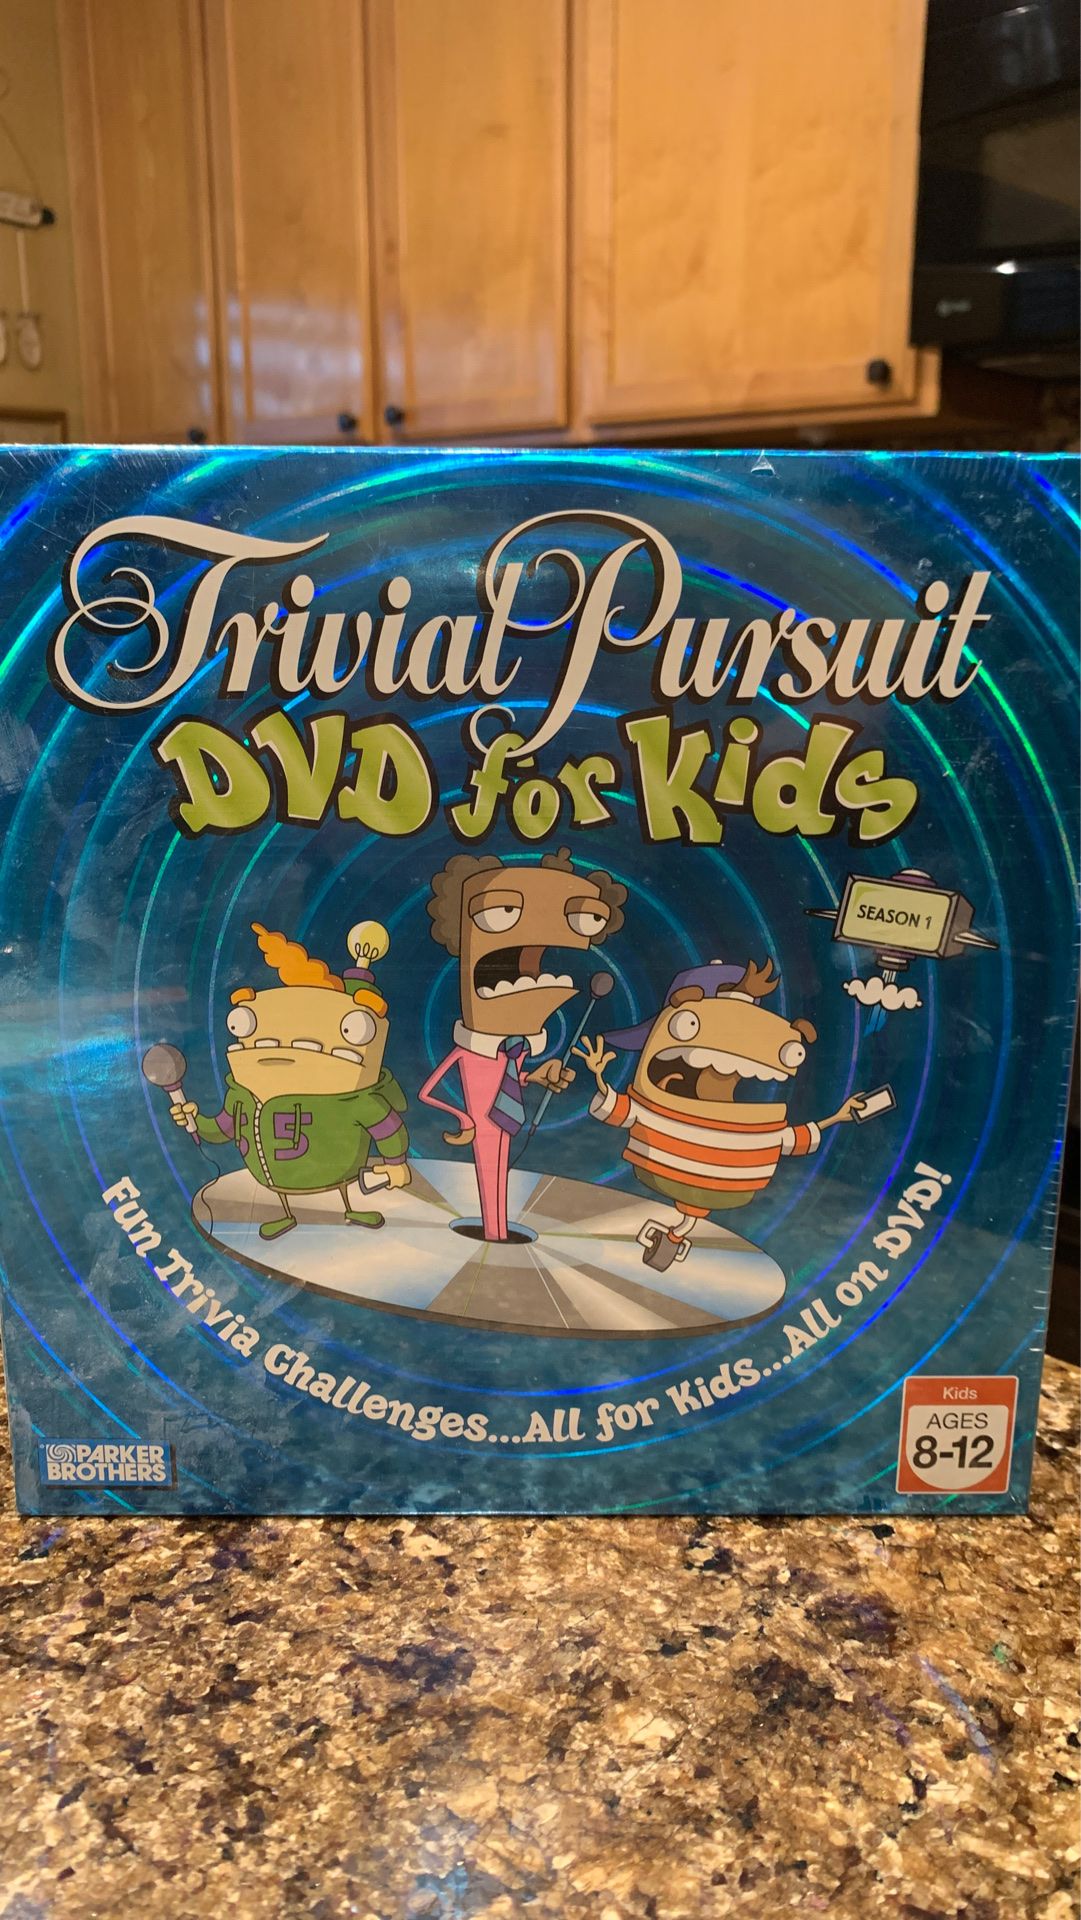 Trivial Pursuit DVD game for kids